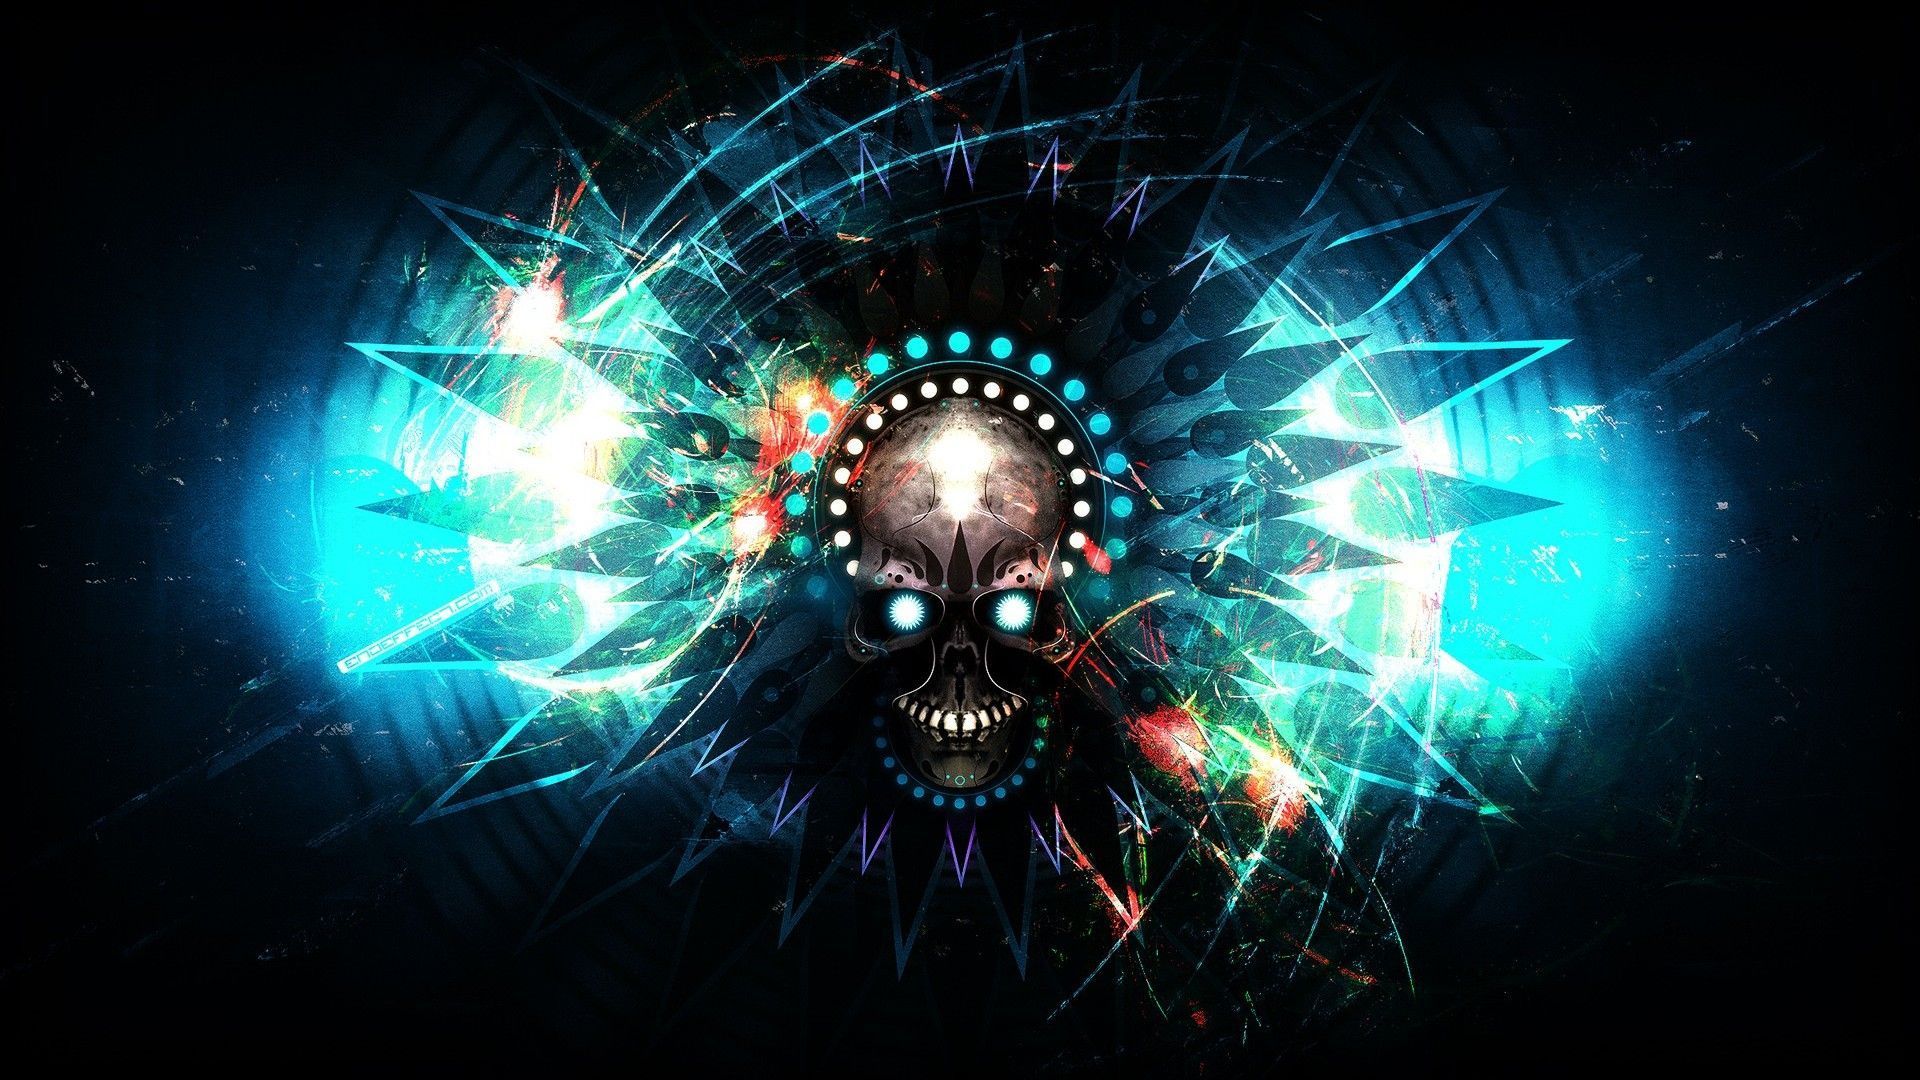 Download Dubstep Wallpaper Latest Awesome #qf2c0i52r5 - Download